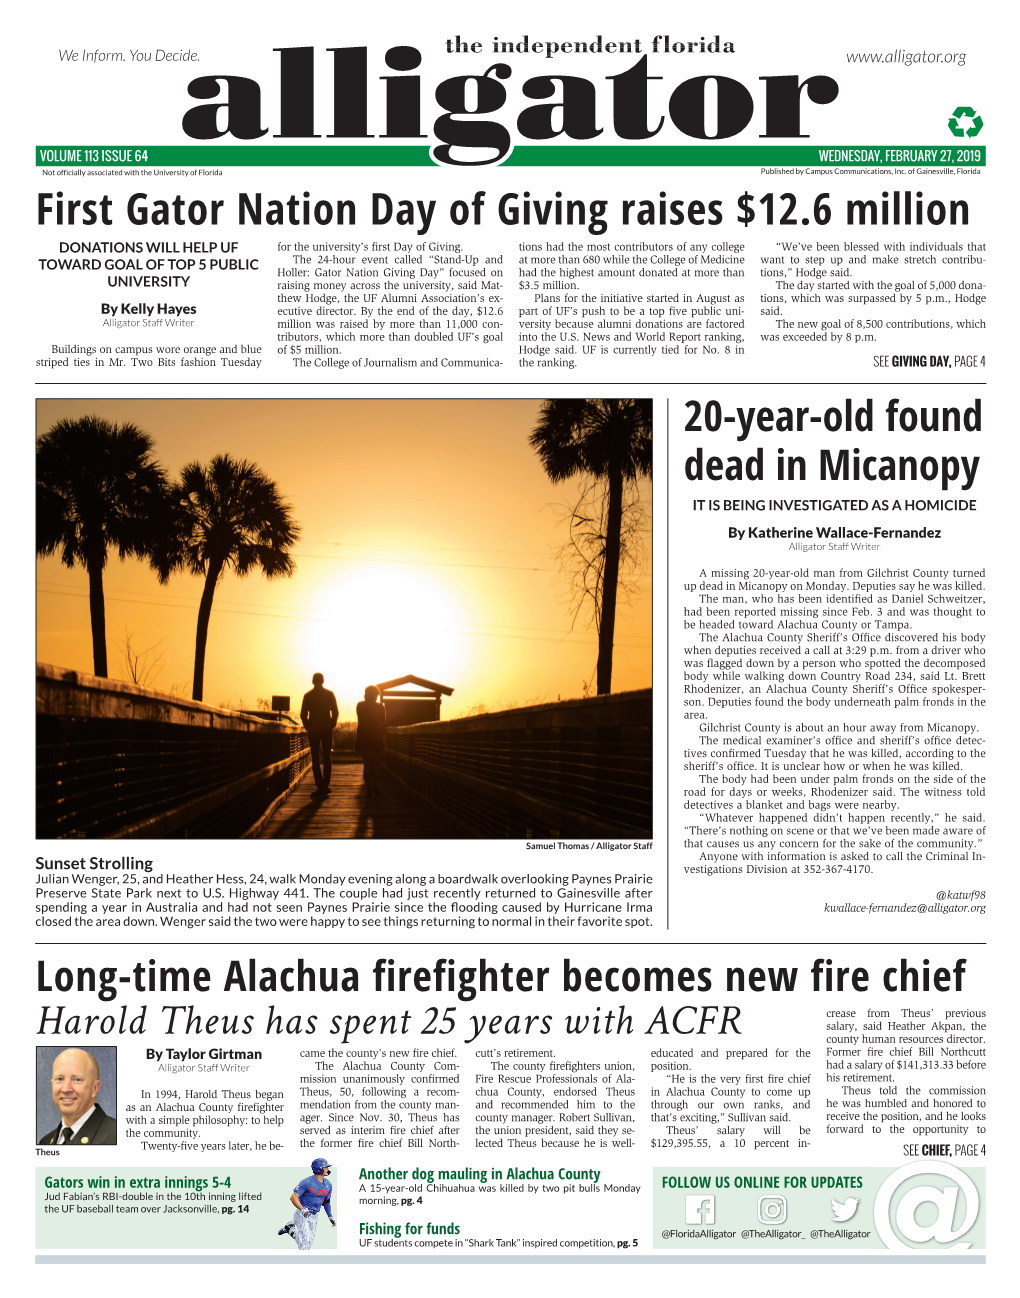 First Gator Nation Day of Giving Raises $12.6 Million DONATIONS WILL HELP UF for the University’S ﬁ Rst Day of Giving